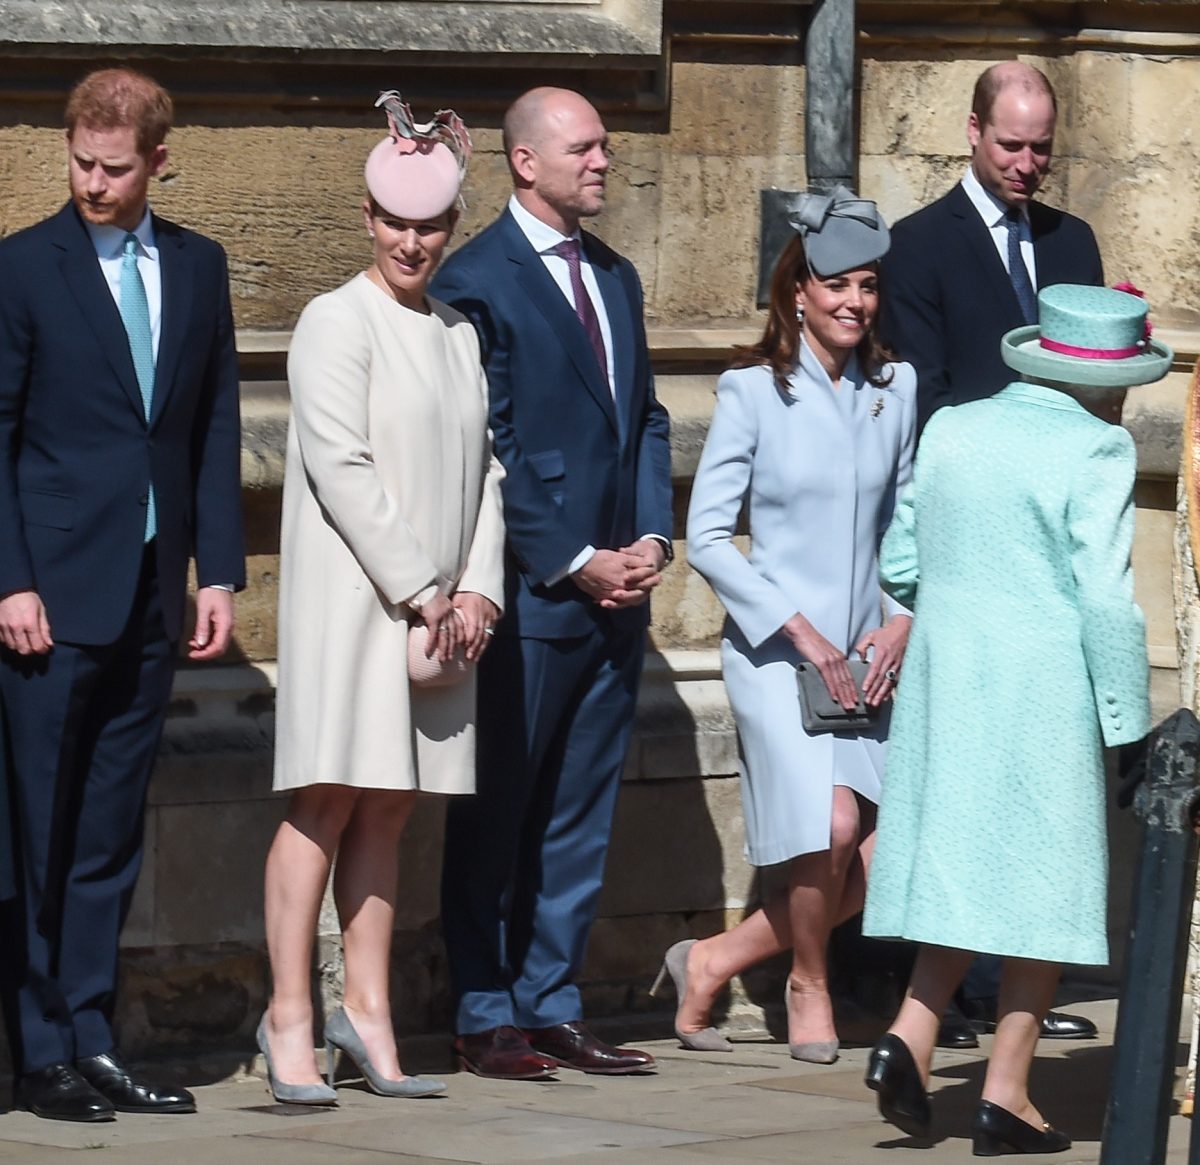 Prince Harry, Prince William, and other members of the royal family greet Queen Elizabeth II as she arrives for the Easter Sunday service at St George's Chapel